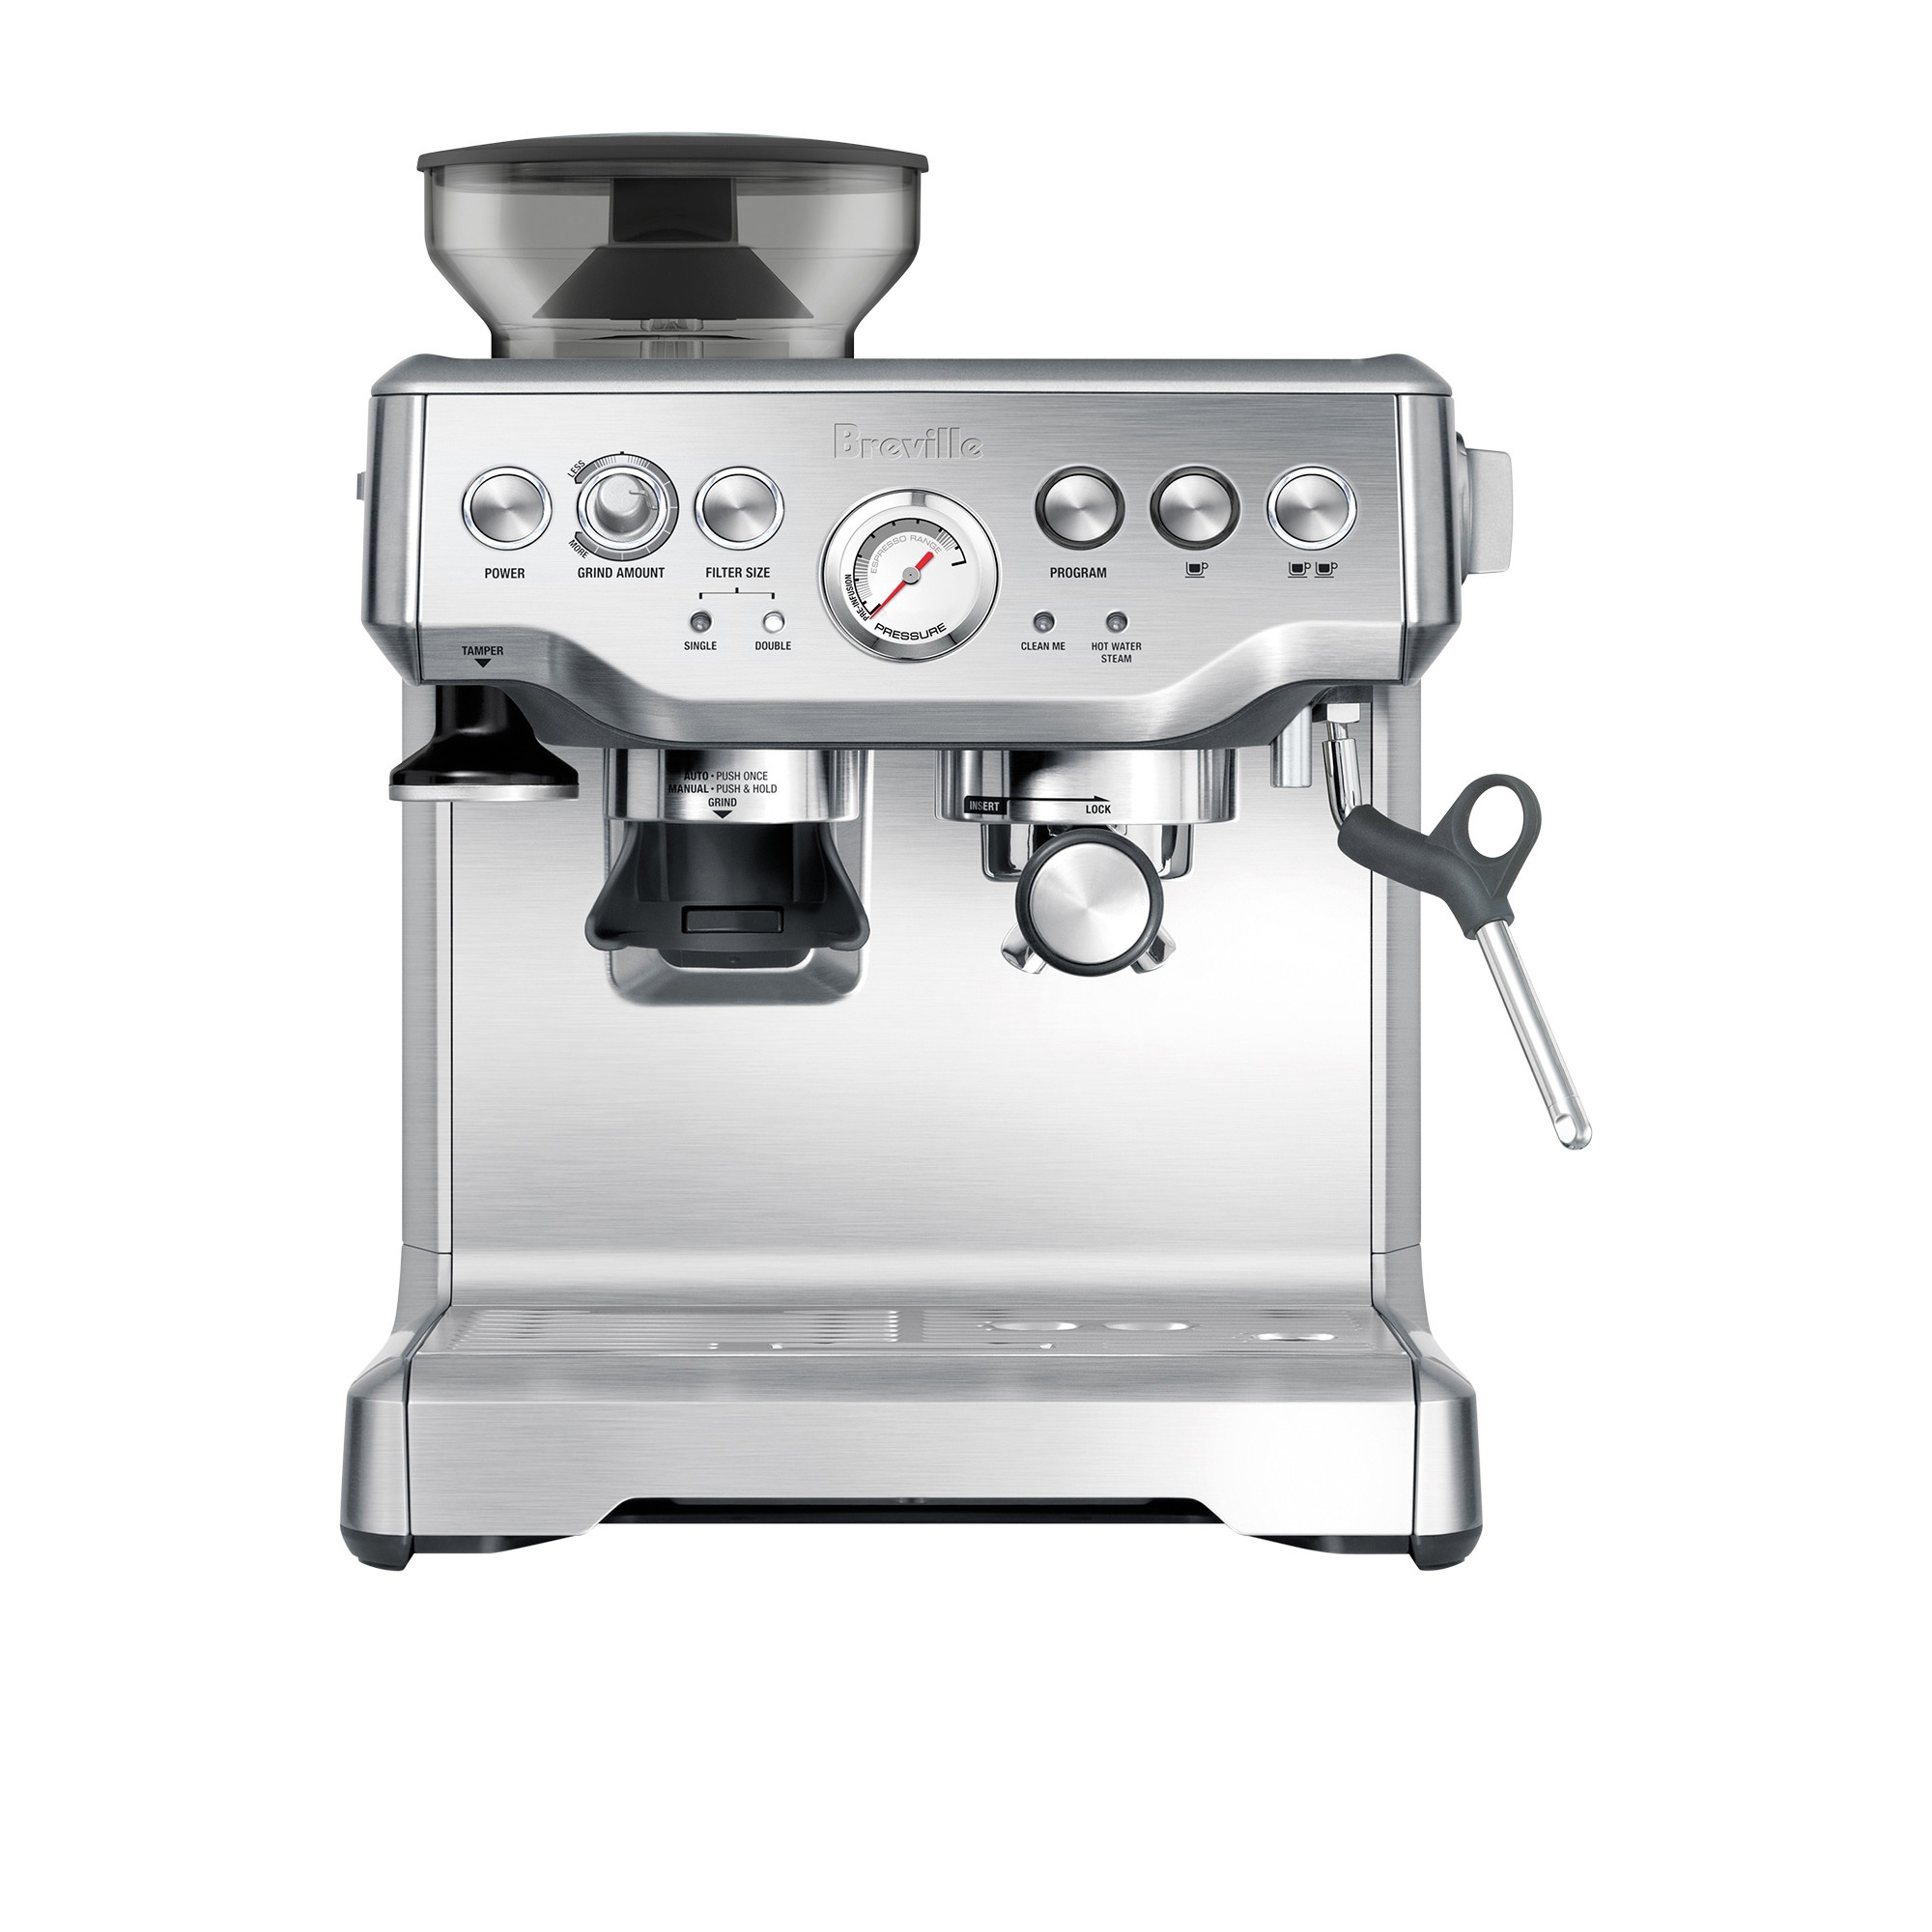 Breville The Barista Express Espresso Machine Brushed Stainless Steel Image 1